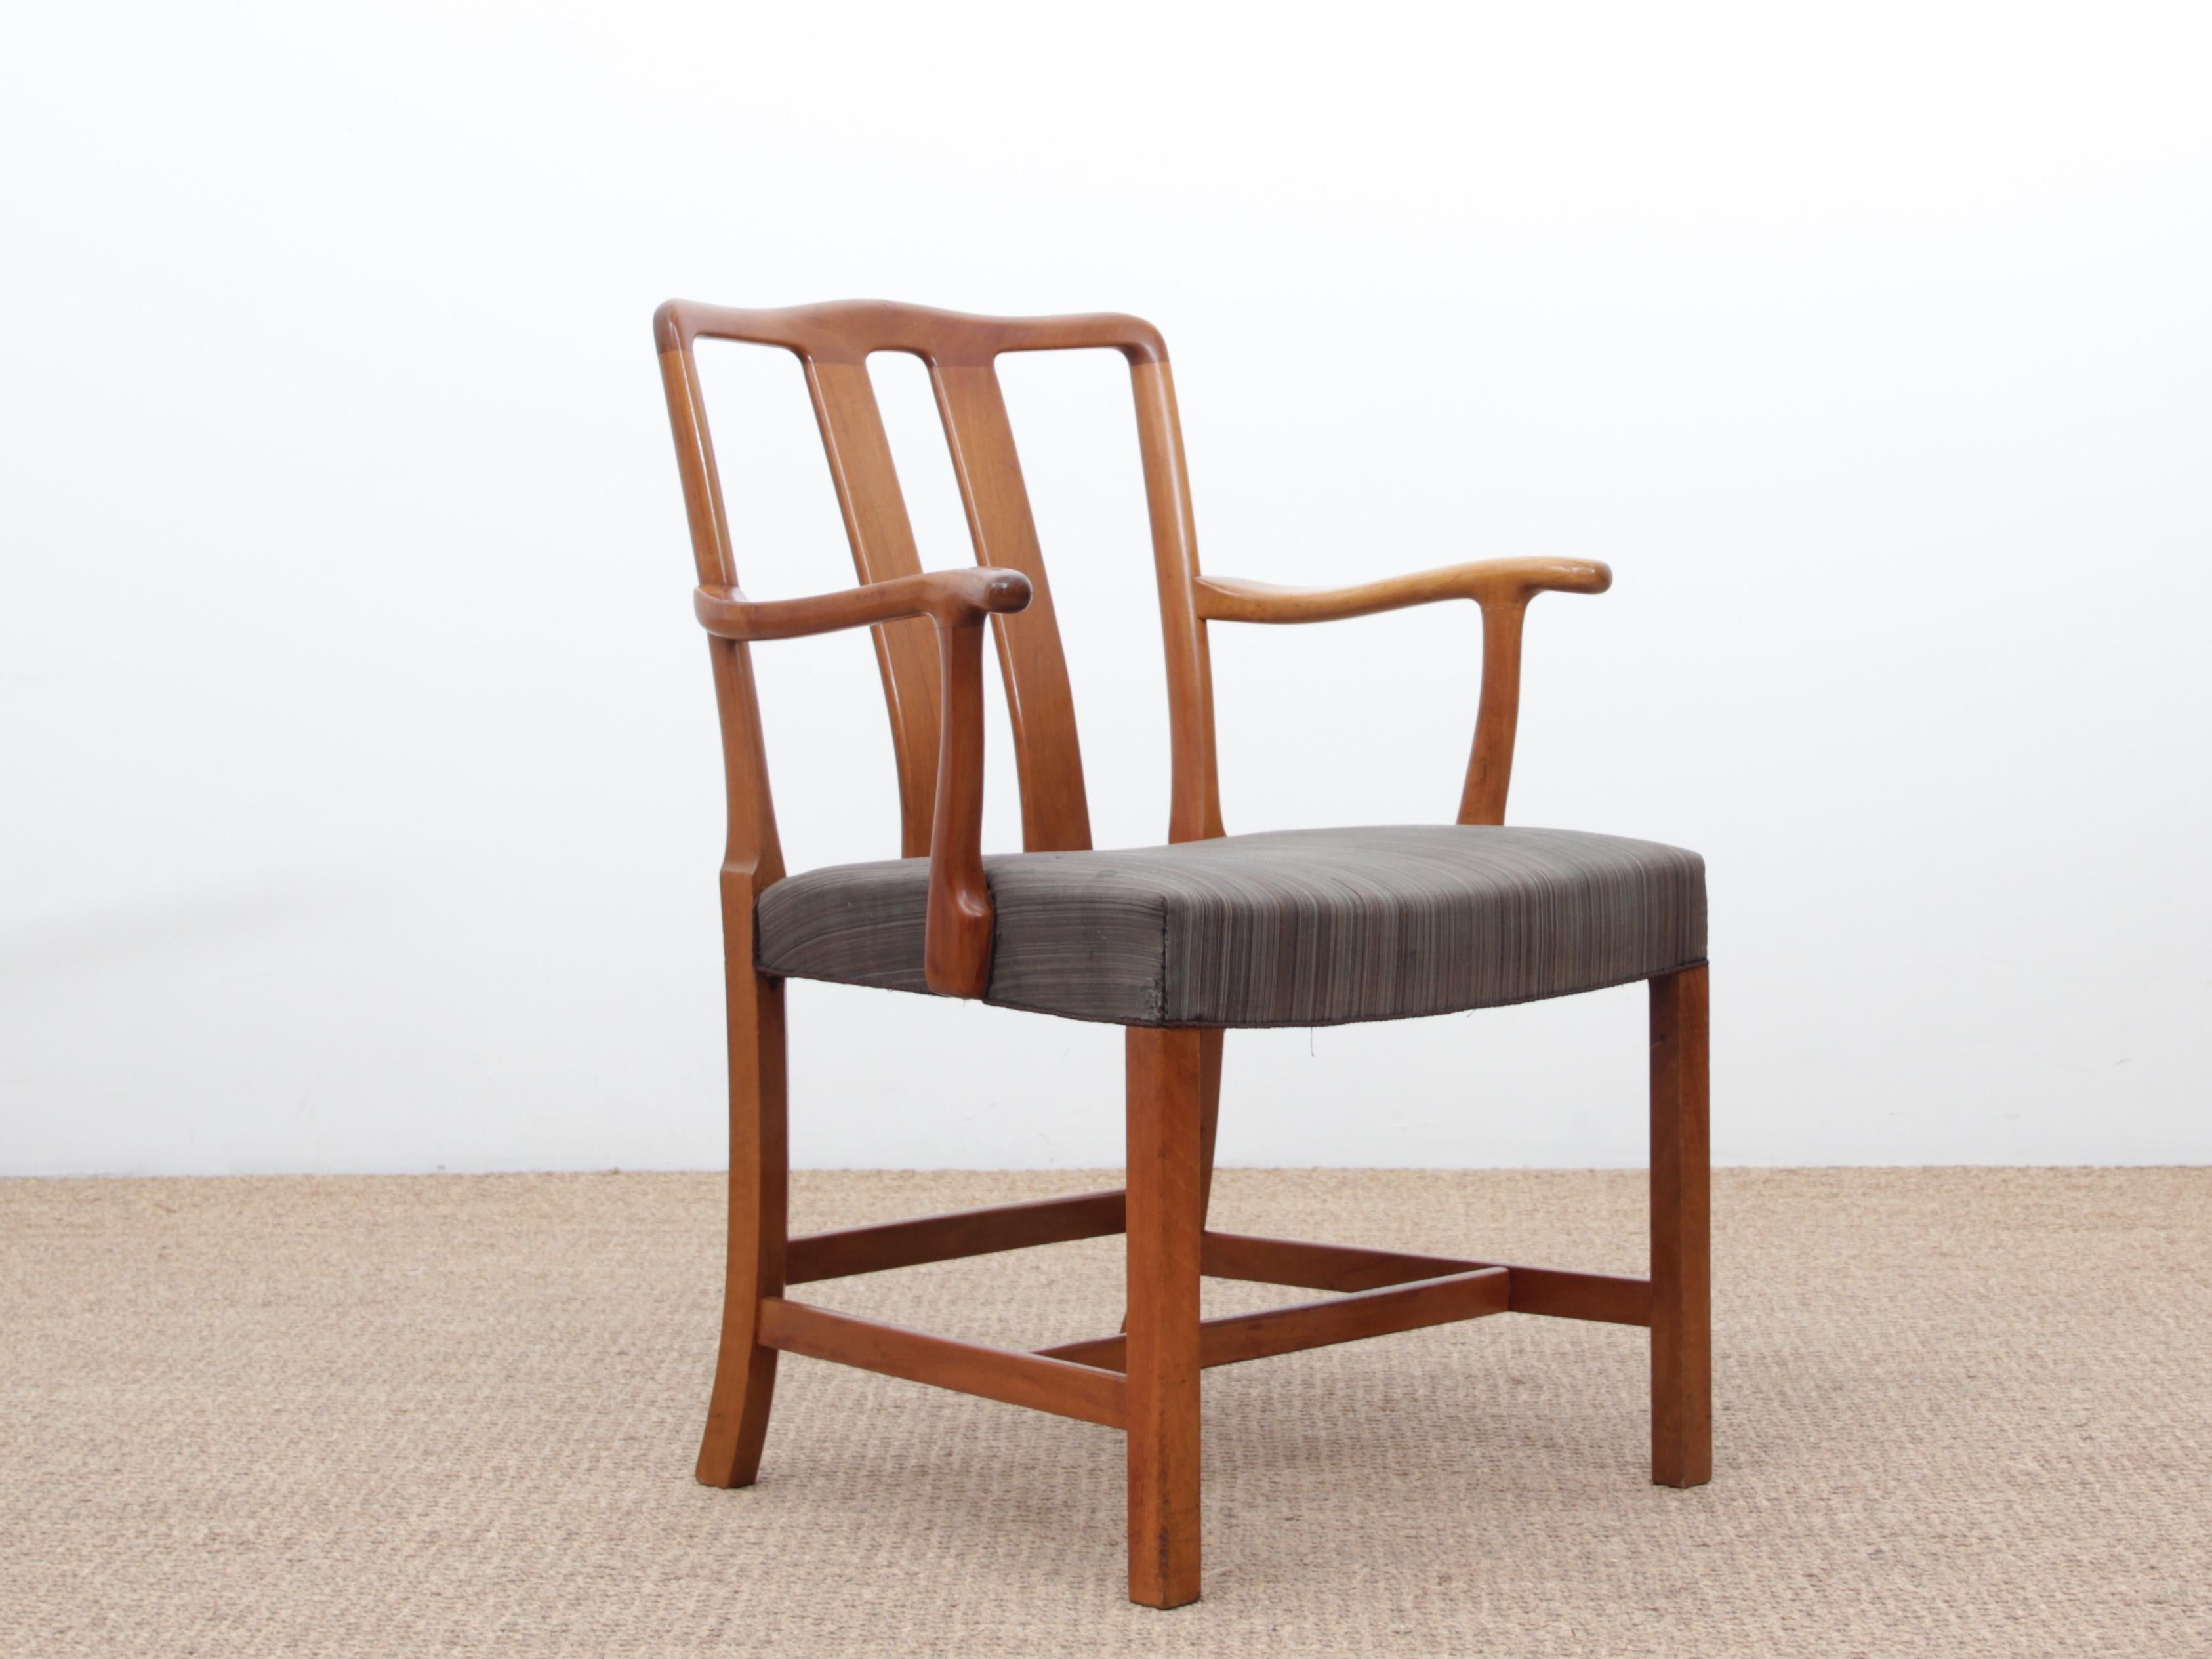 Mahogany Mid-Century Modern Scandinavian Pair of Armchairs by Ole Wancher For Sale